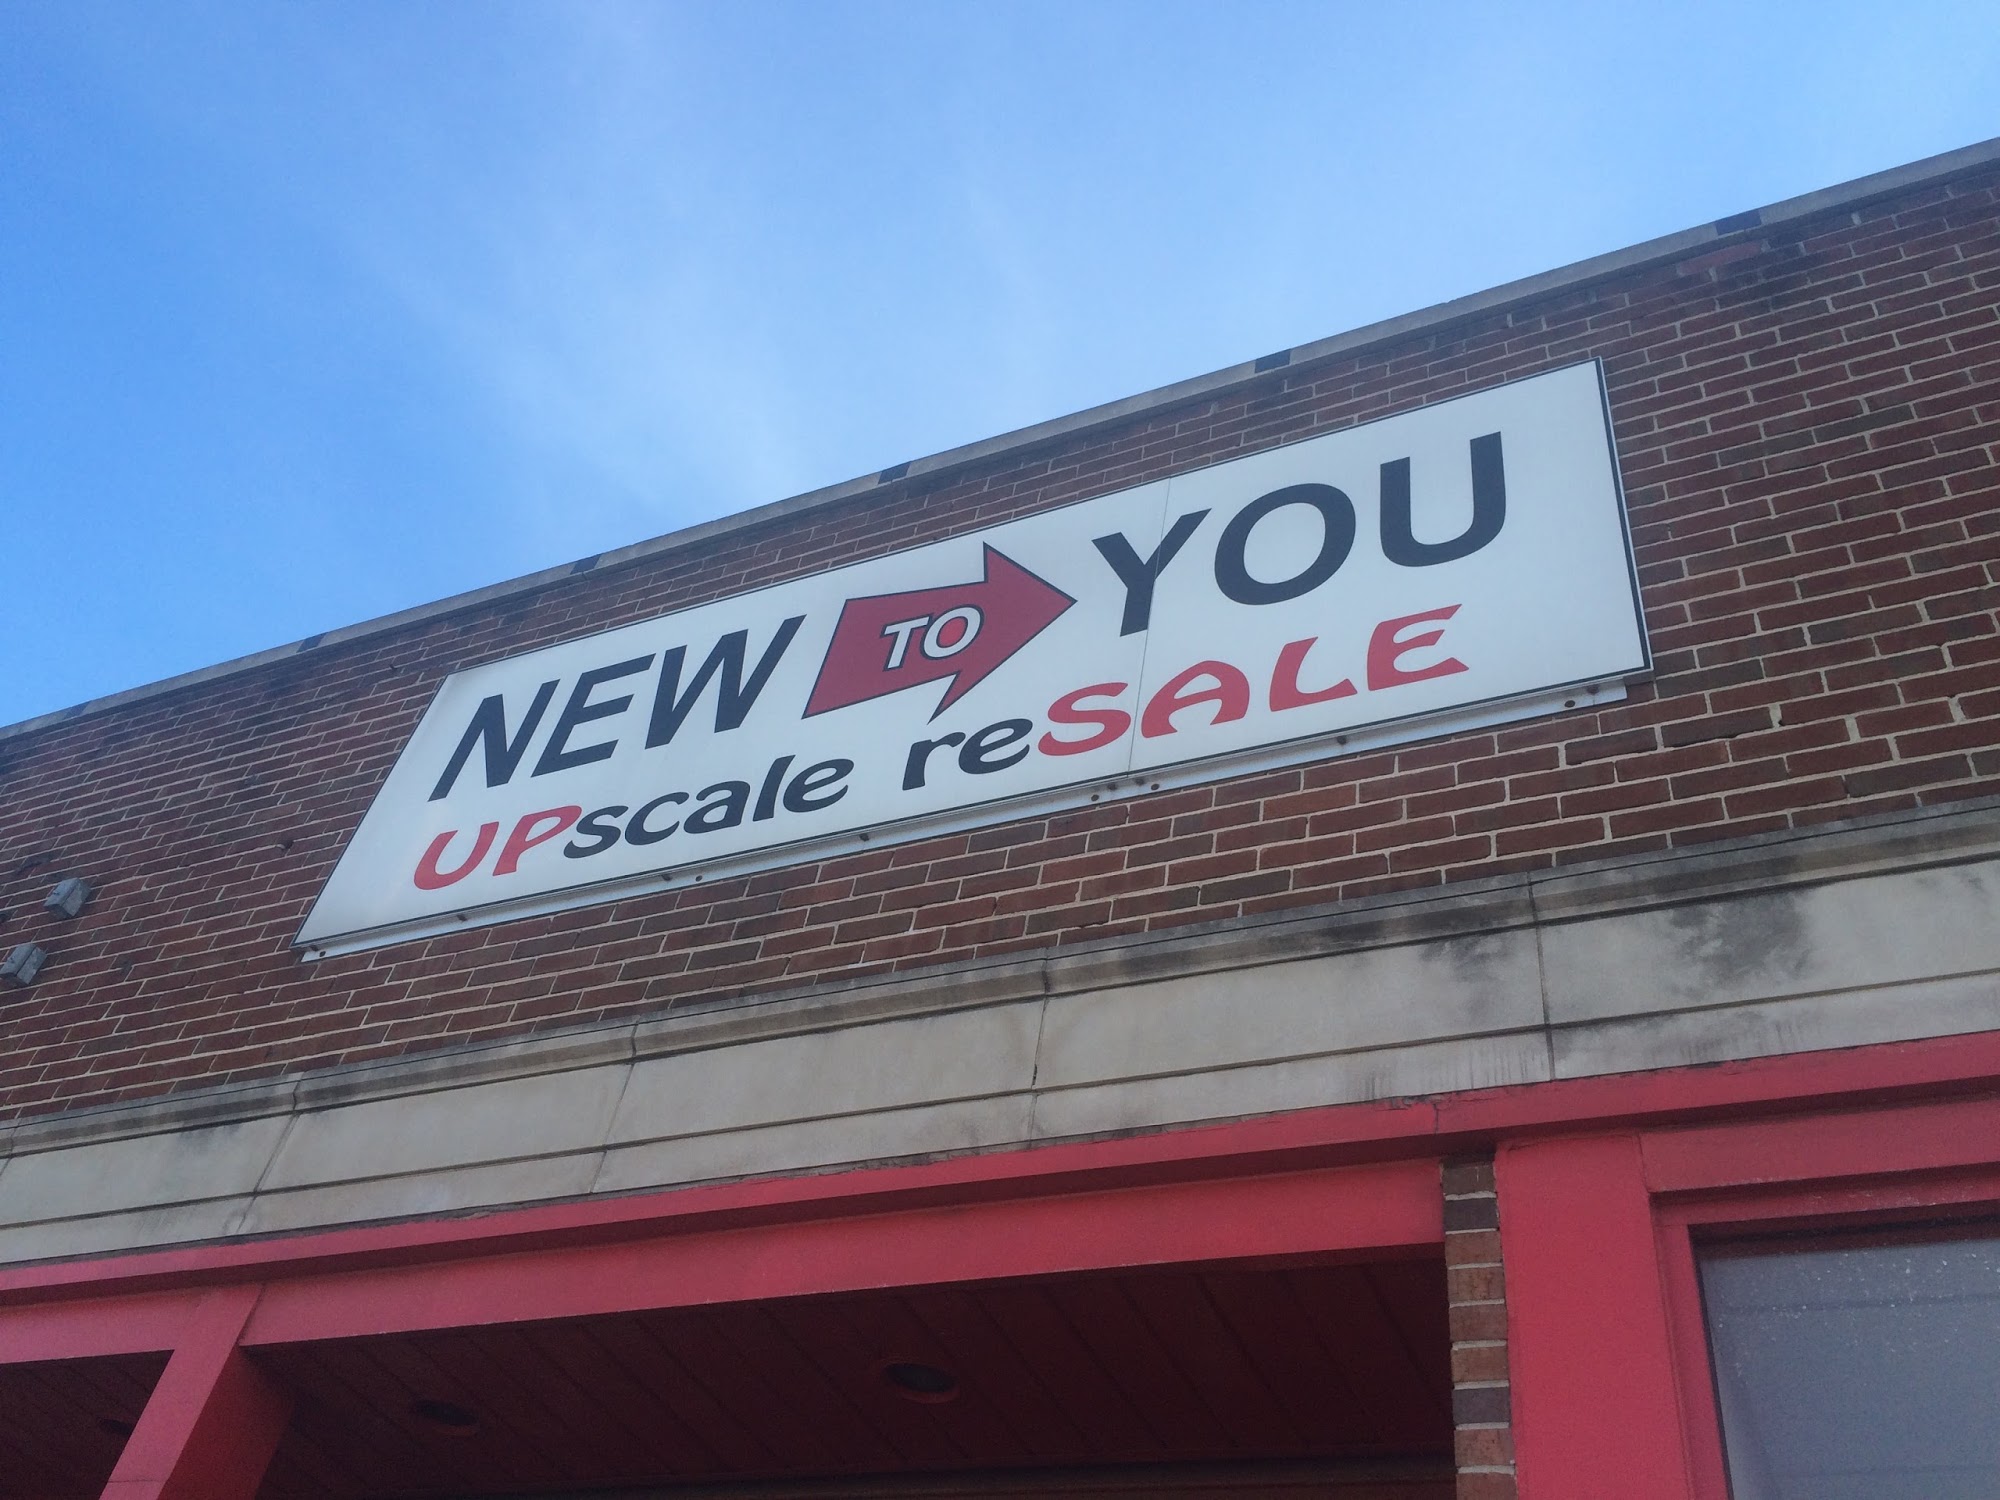 New To You Upscale Resale Store